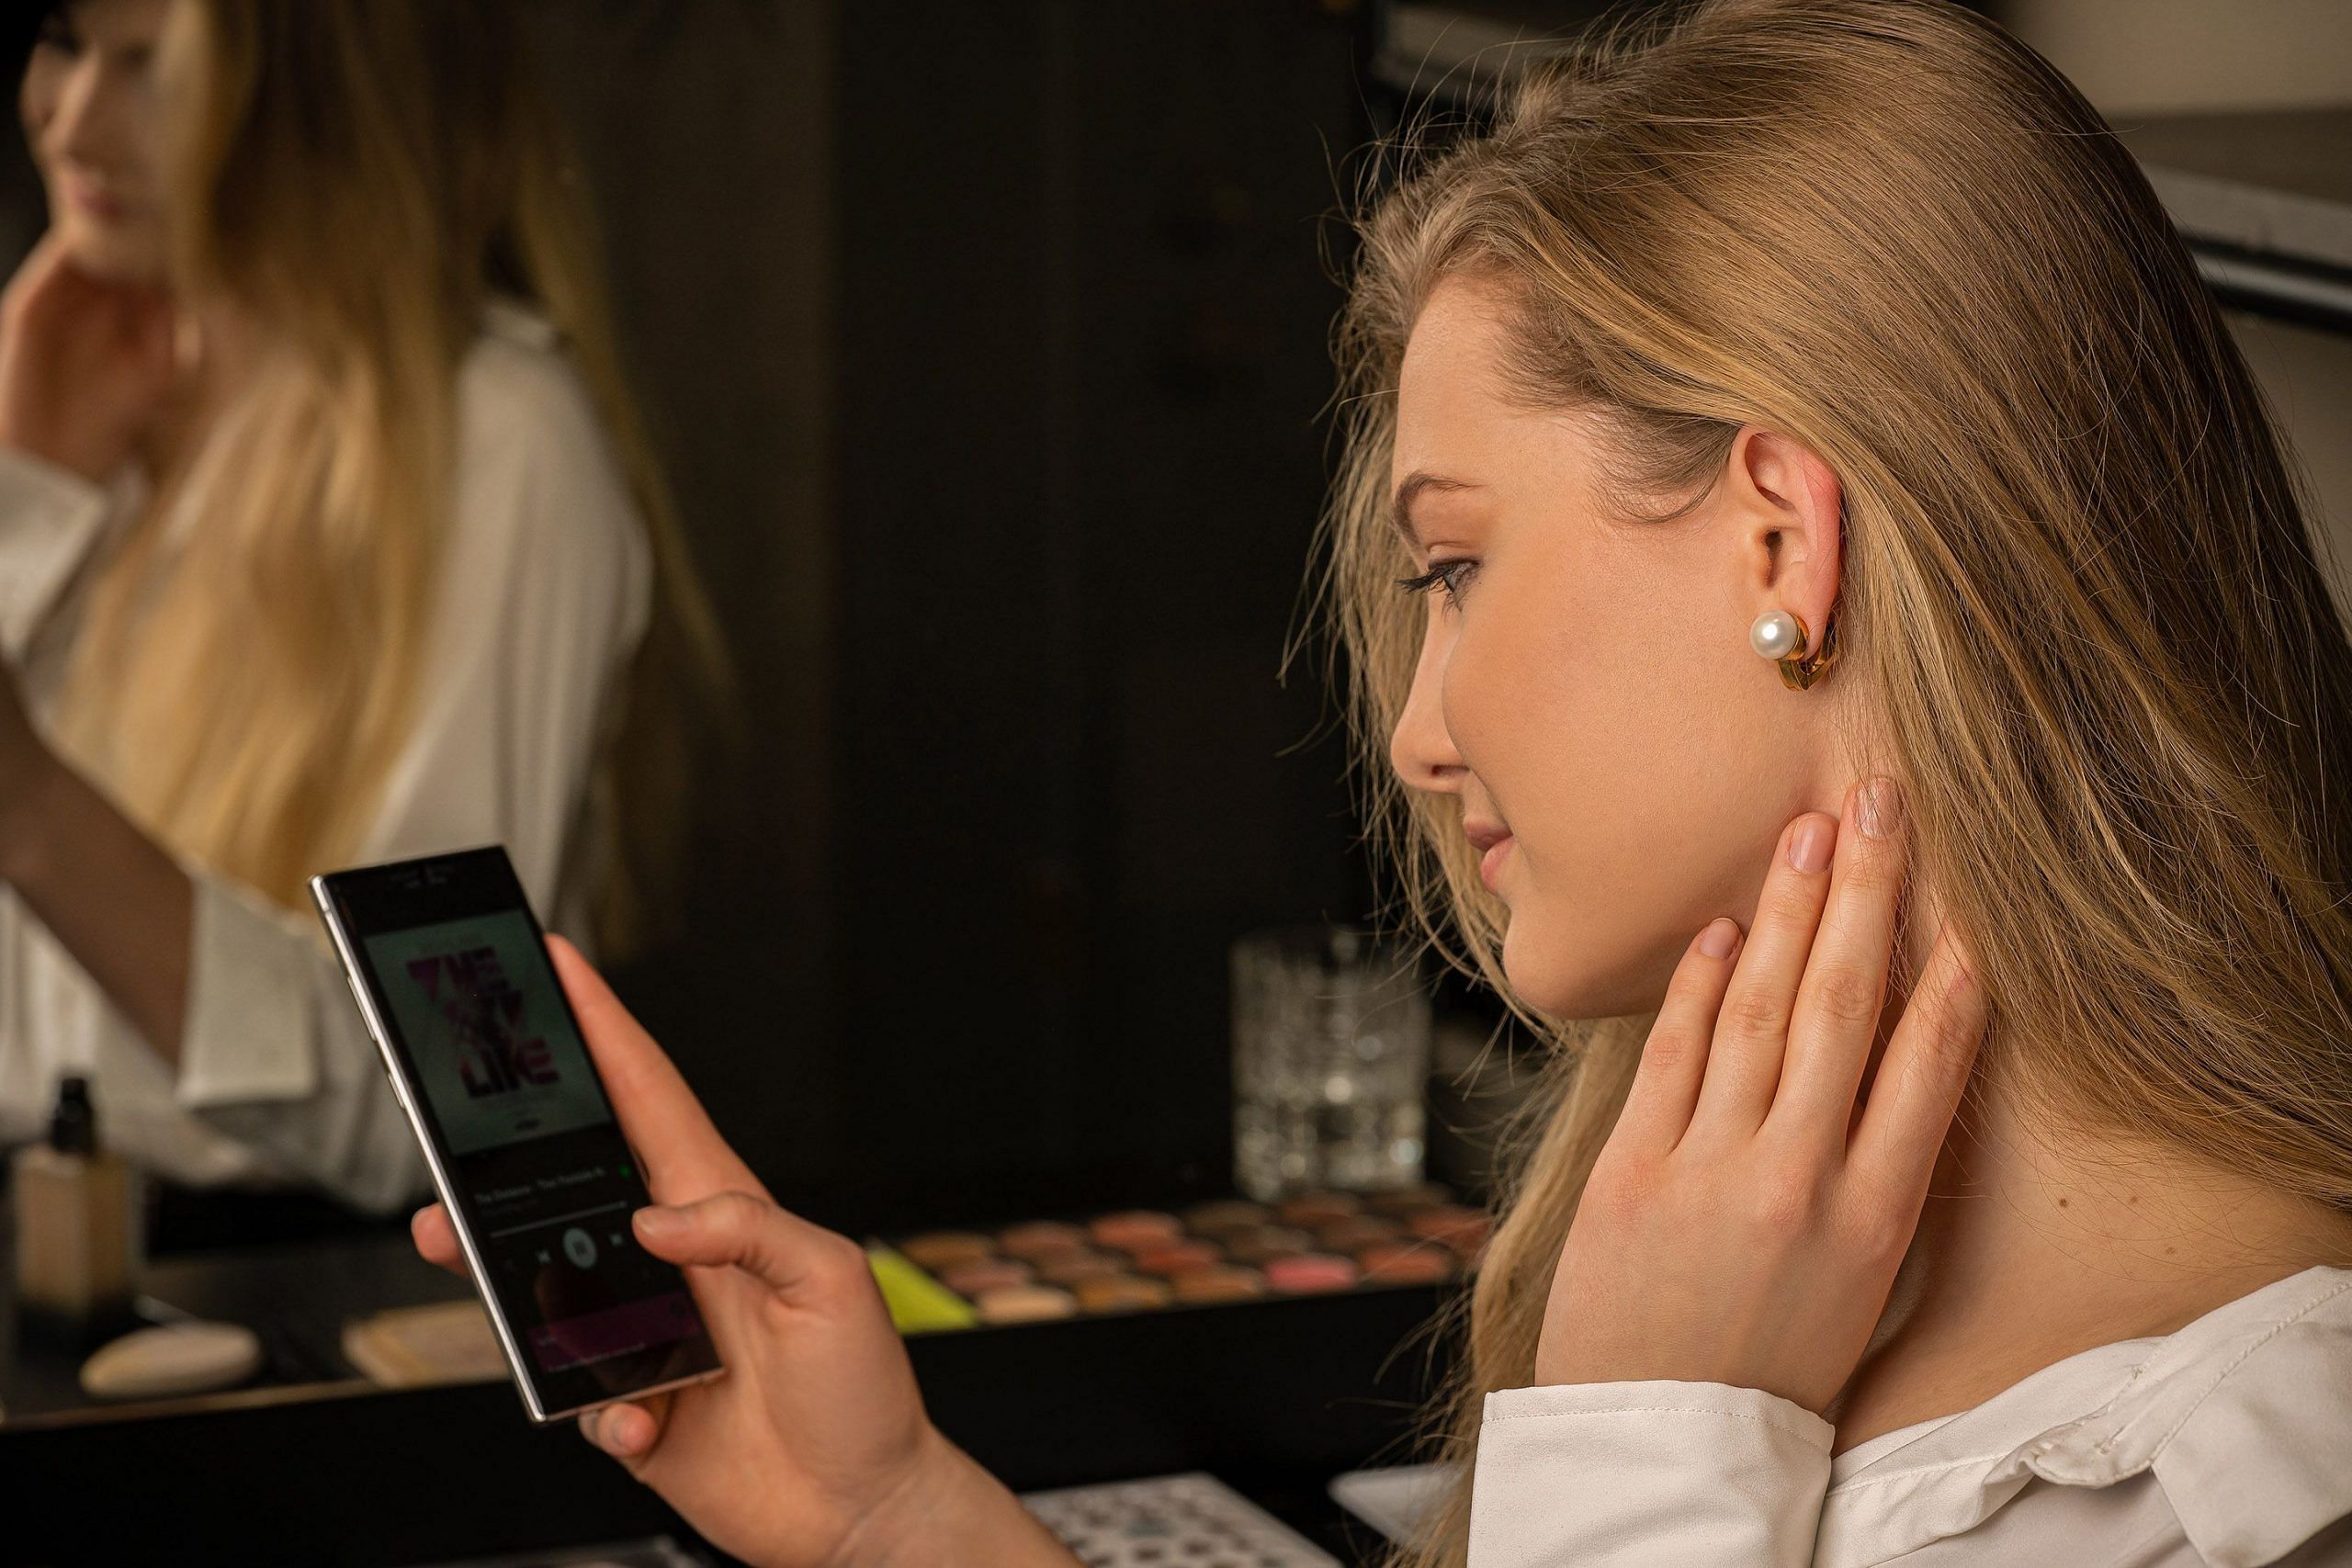 TWS earbuds disguised as pearl earrings are the perfect intersection of  fashion and technology - Yanko Design | Pearl earrings, Pearls, Earbuds